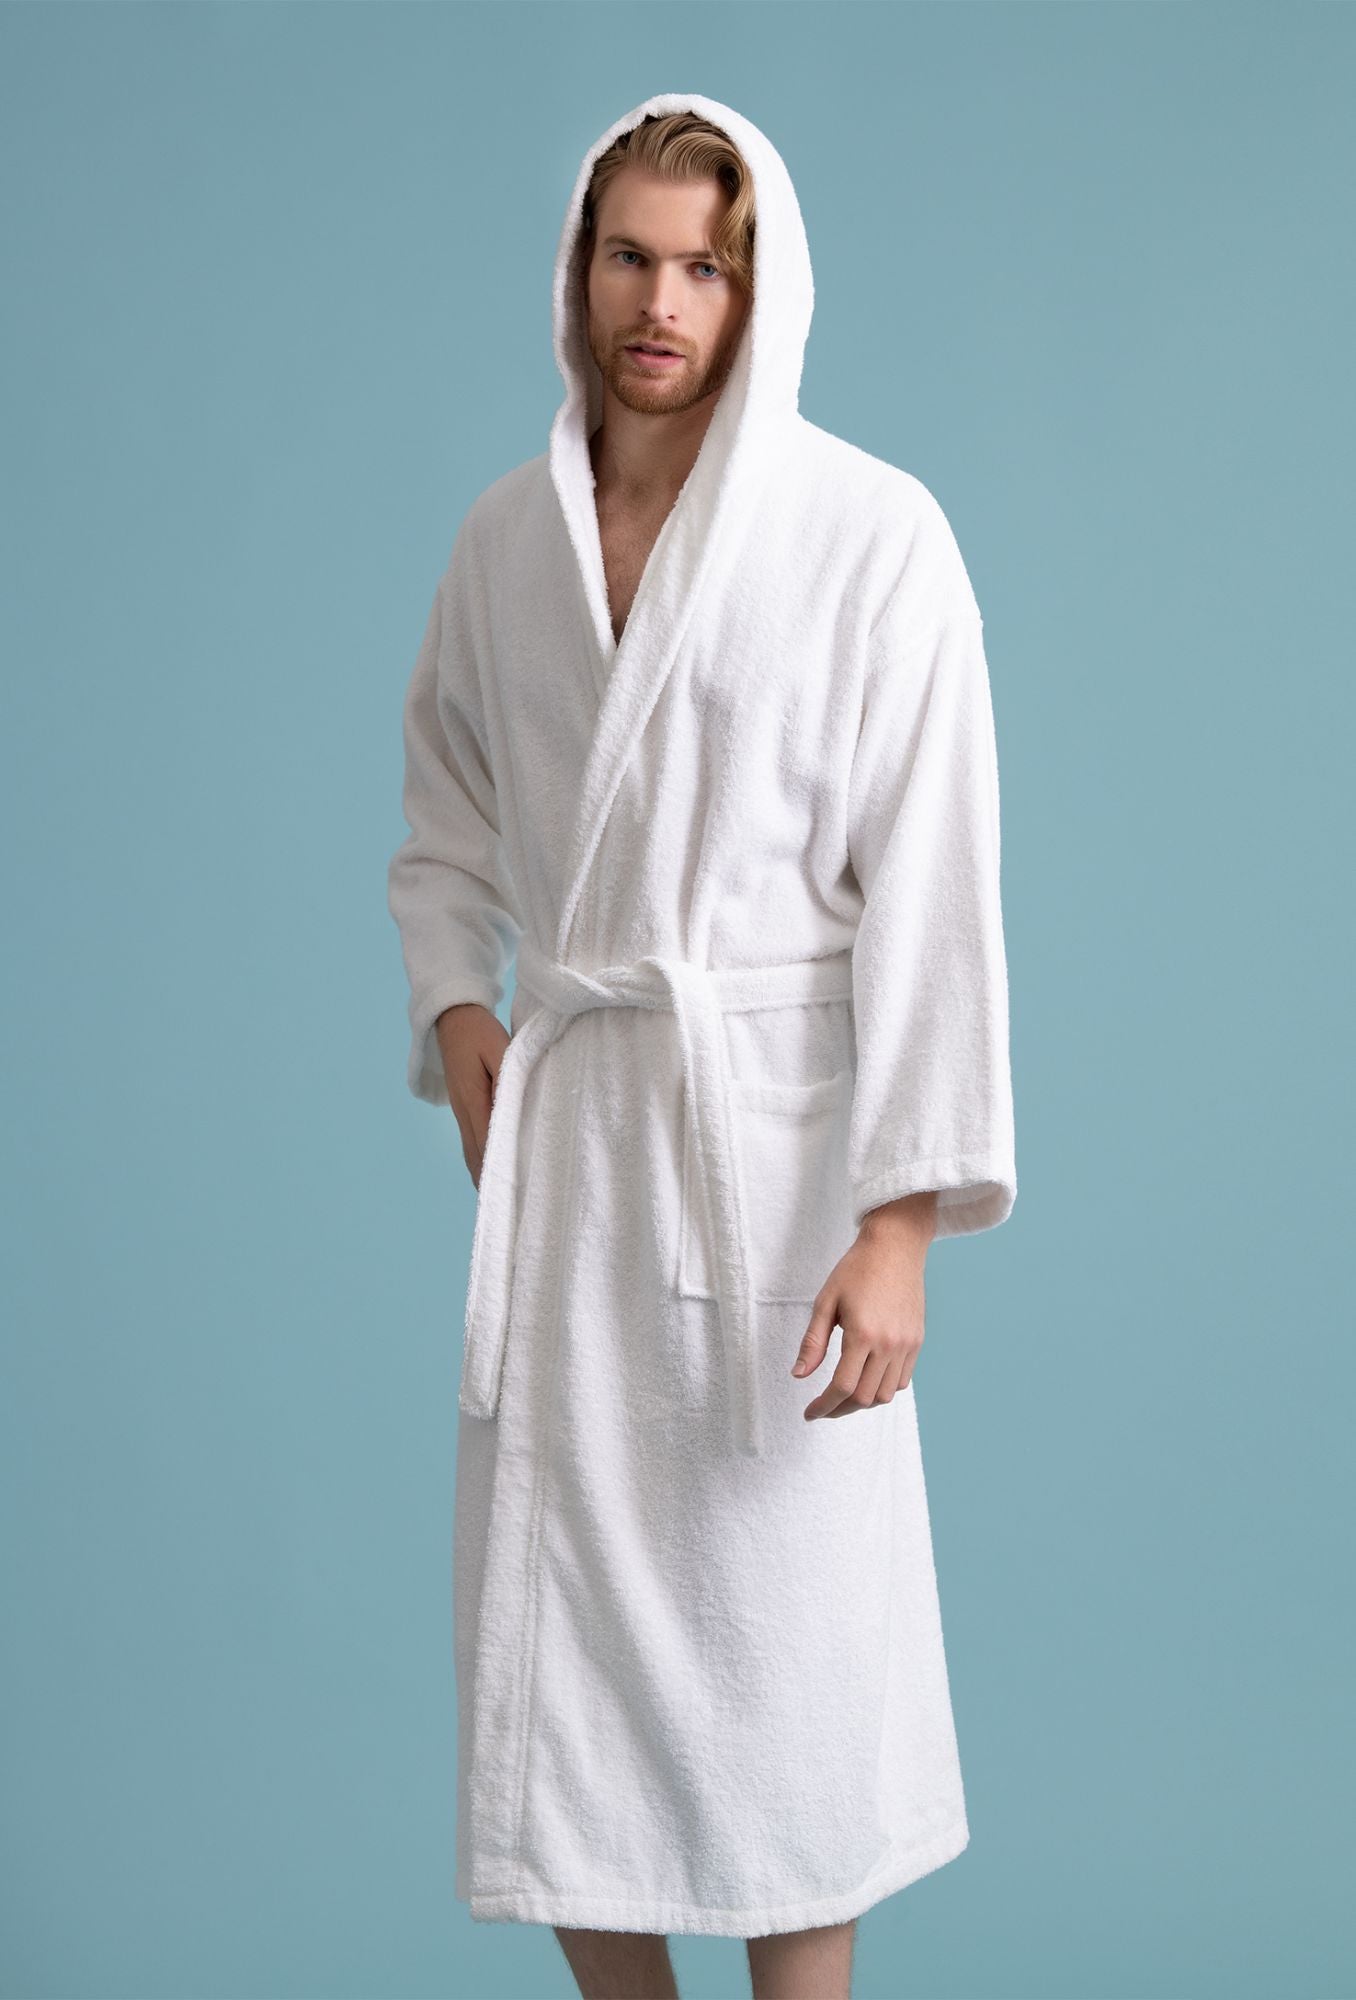 Grianlook Mens Dressing Gown Solid Color Wrap Robe Long Sleeve Bath Robes  Men Soft Nightwear Warm Hooded Towelling White M - Walmart.com